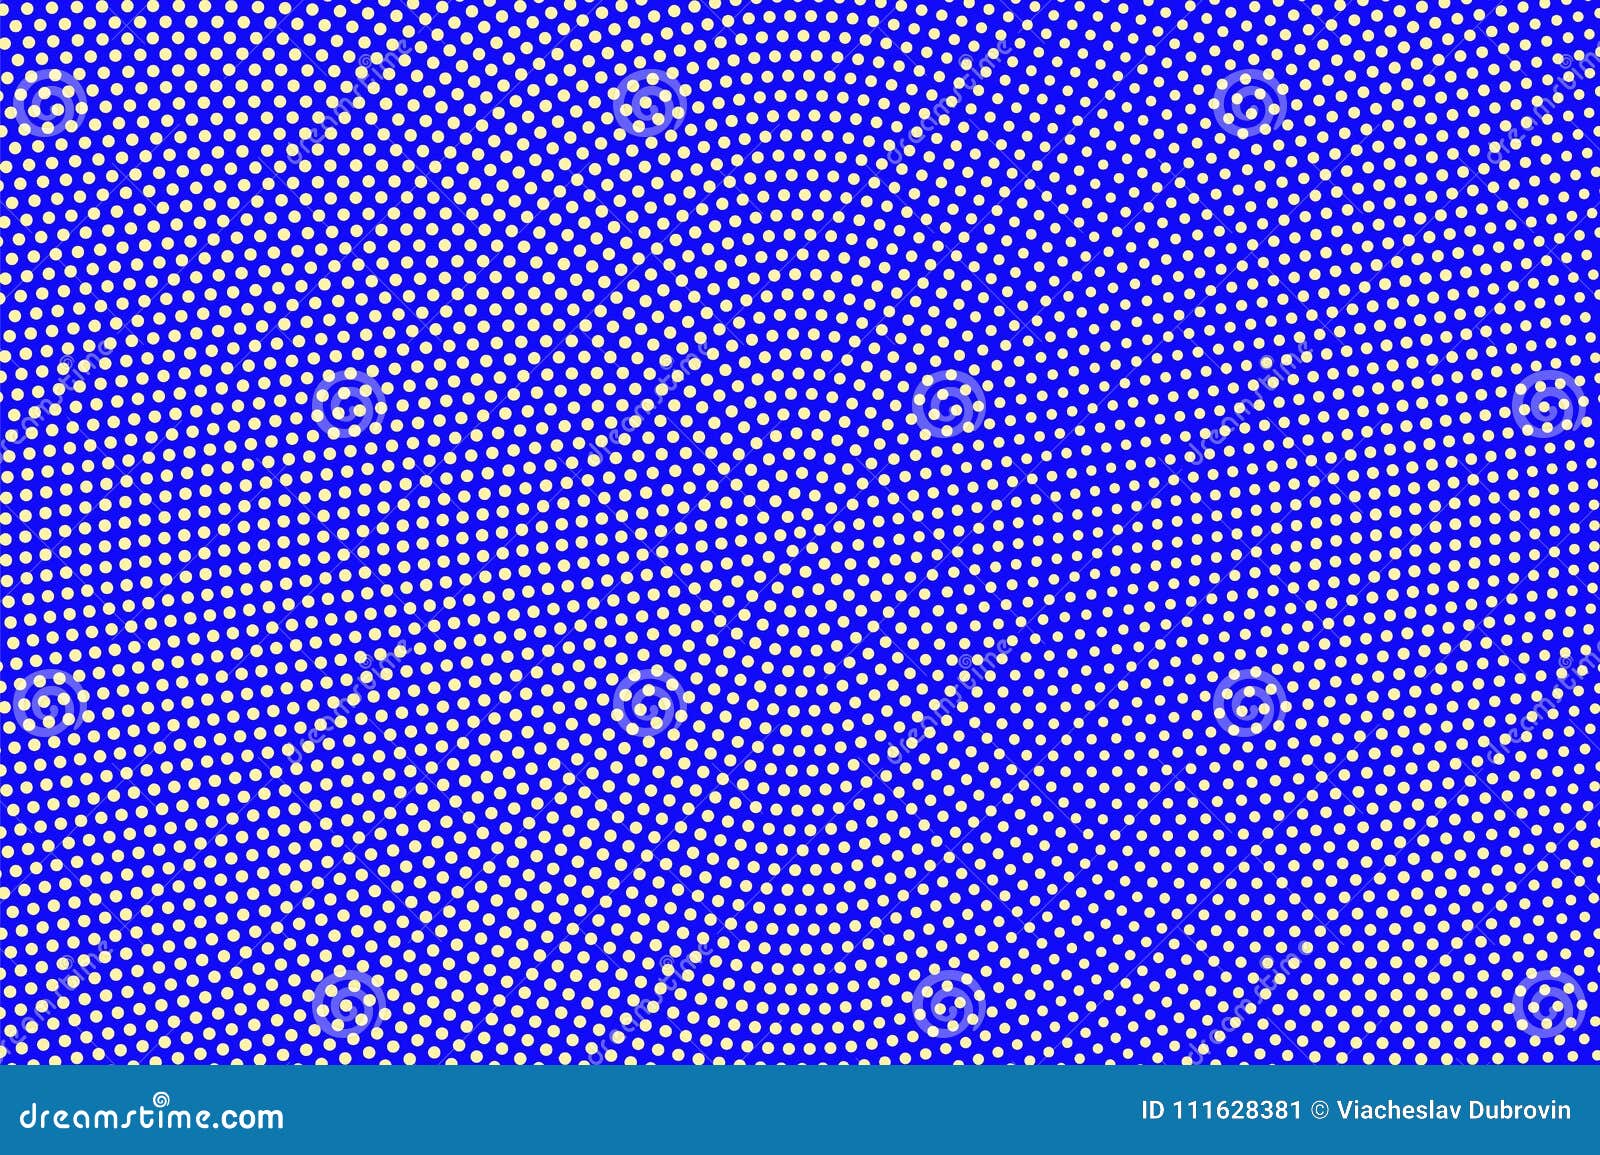 Blue Yellow Dotted Halftone. Minimal Sparse Dotted Gradient. Half Tone ...